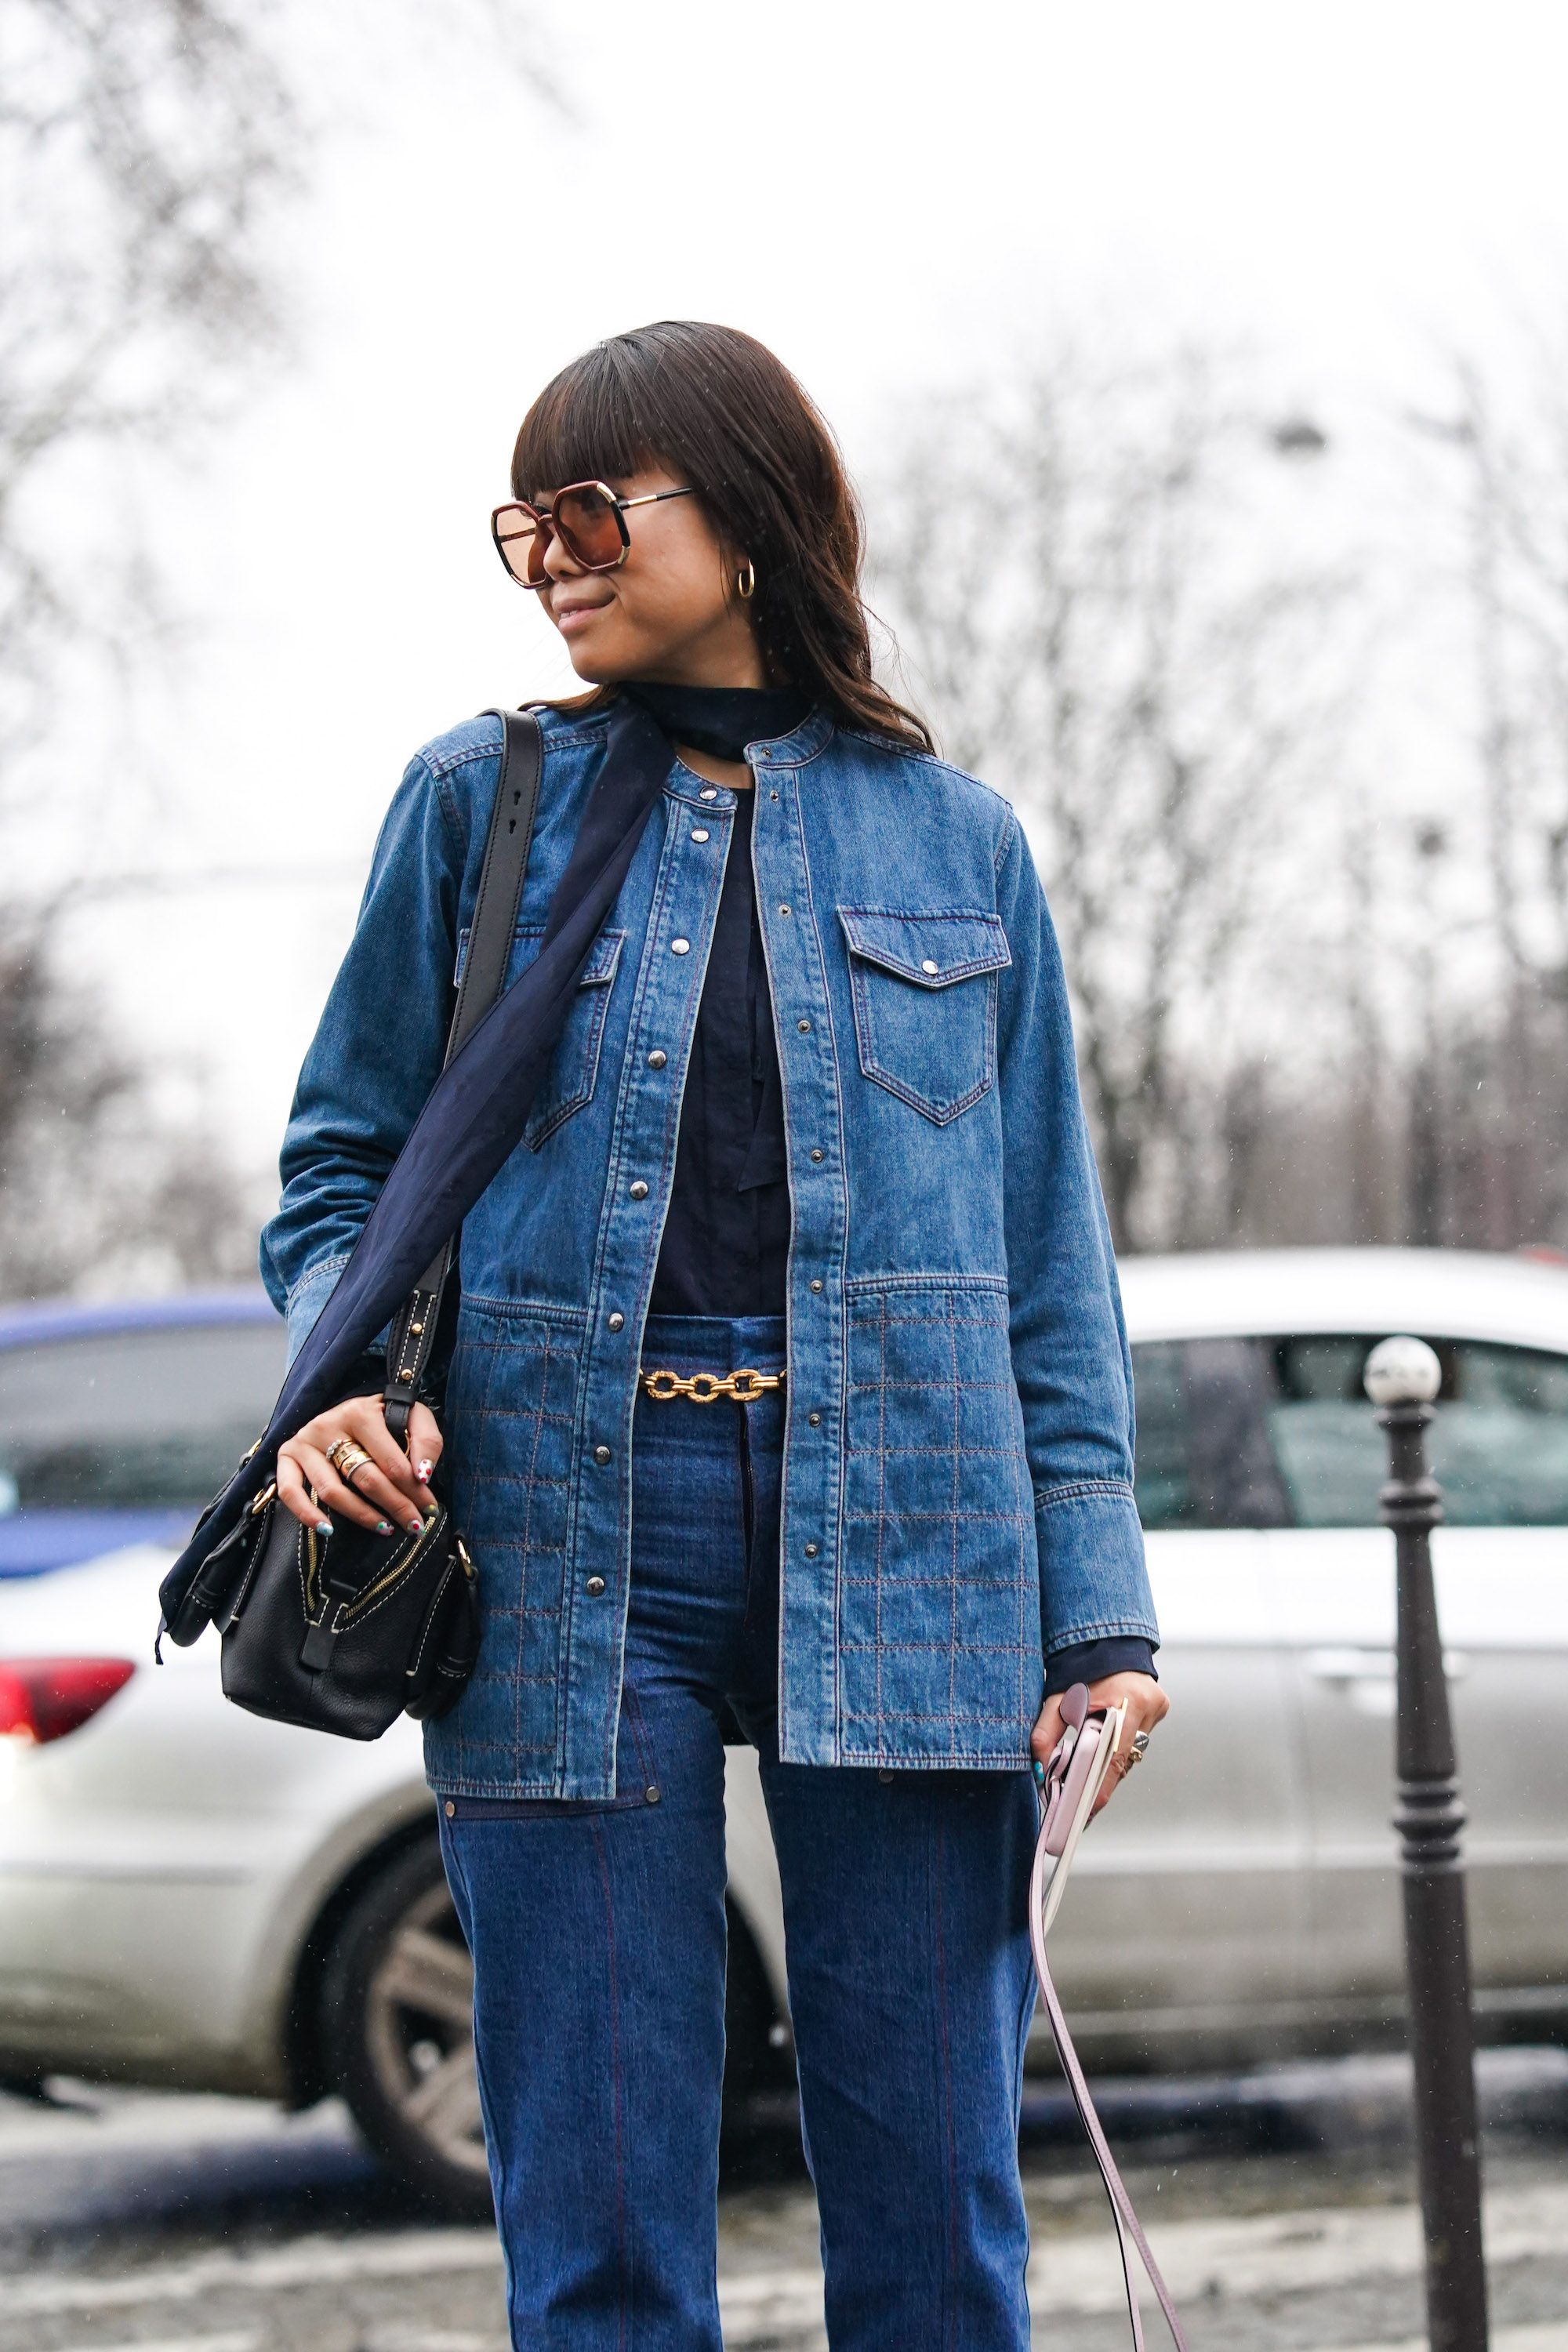 12 Denim Outfits - What To With A Denim Jacket